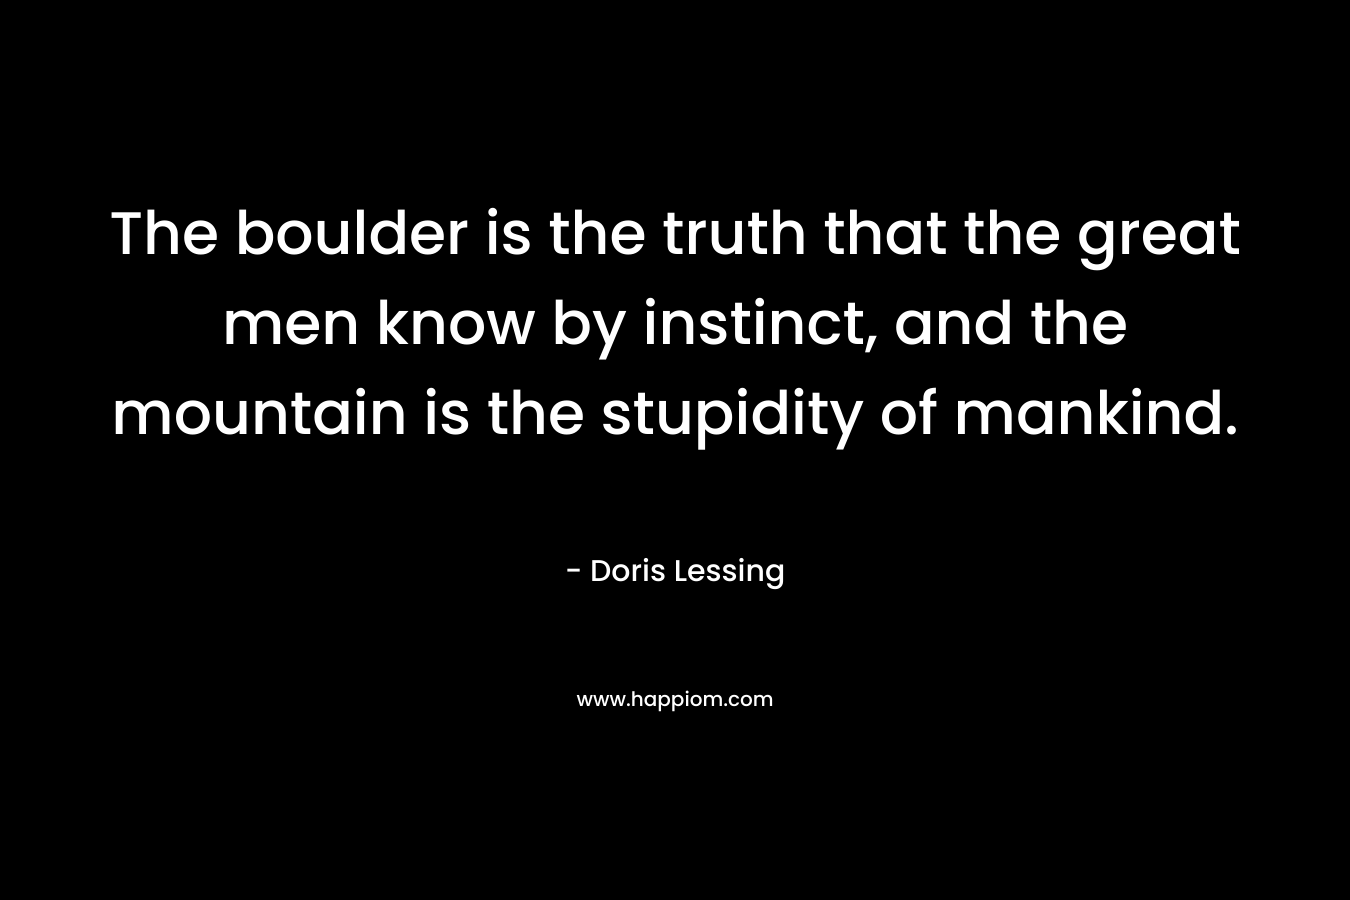 The boulder is the truth that the great men know by instinct, and the mountain is the stupidity of mankind. – Doris Lessing